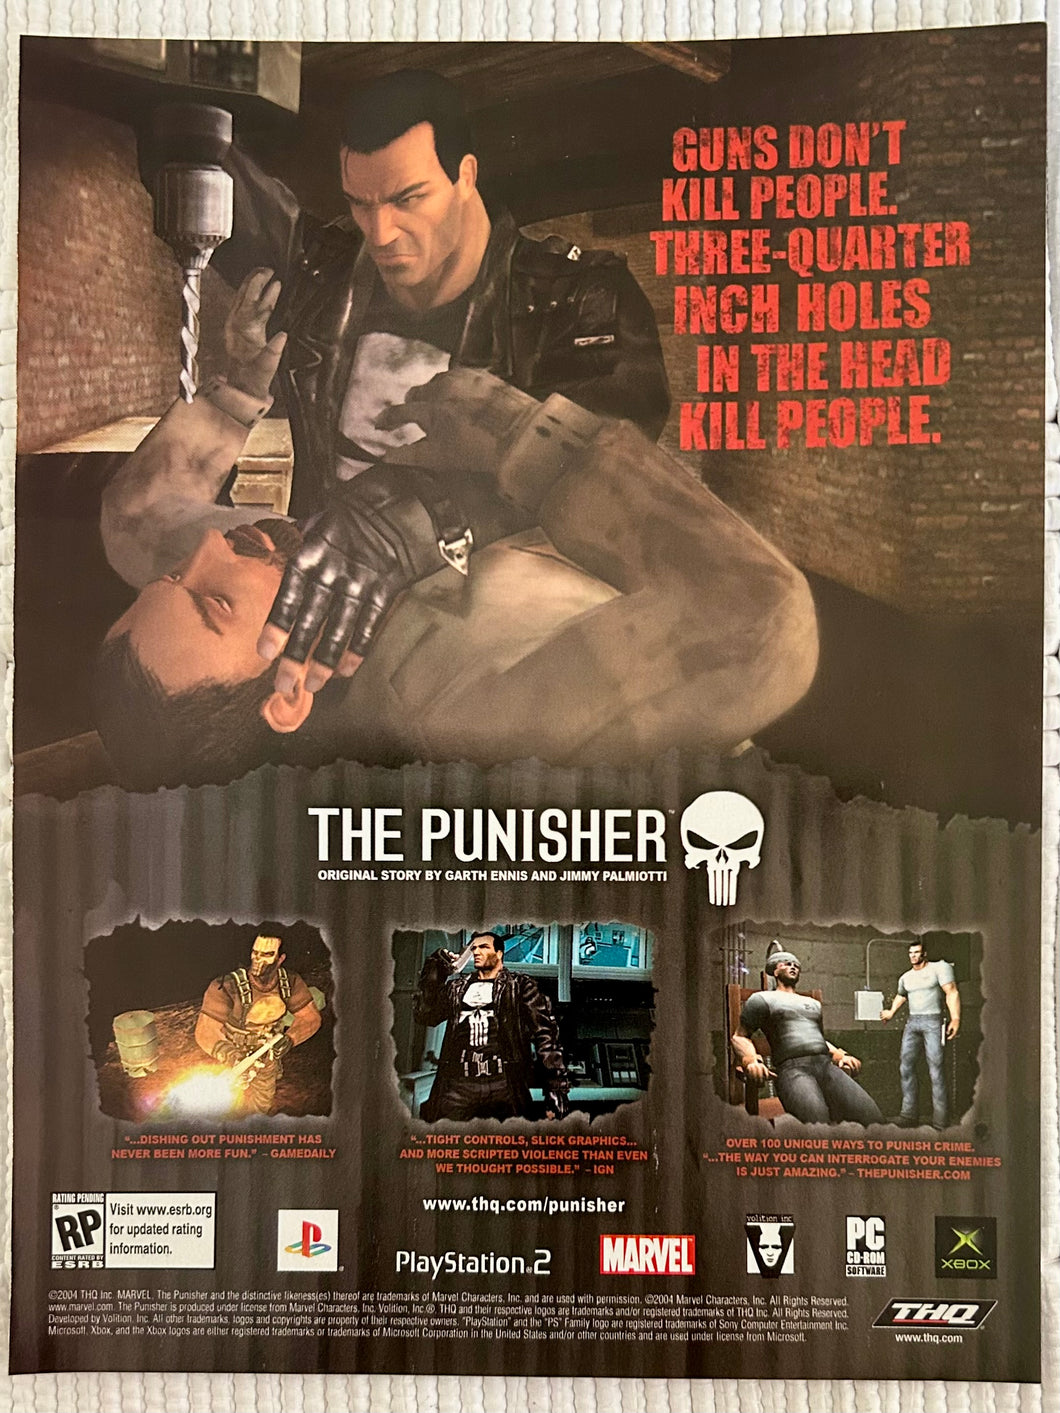 The Punisher - PS2 NGC Xbox - Original Vintage Advertisement - Print Ads - Laminated A4 Poster